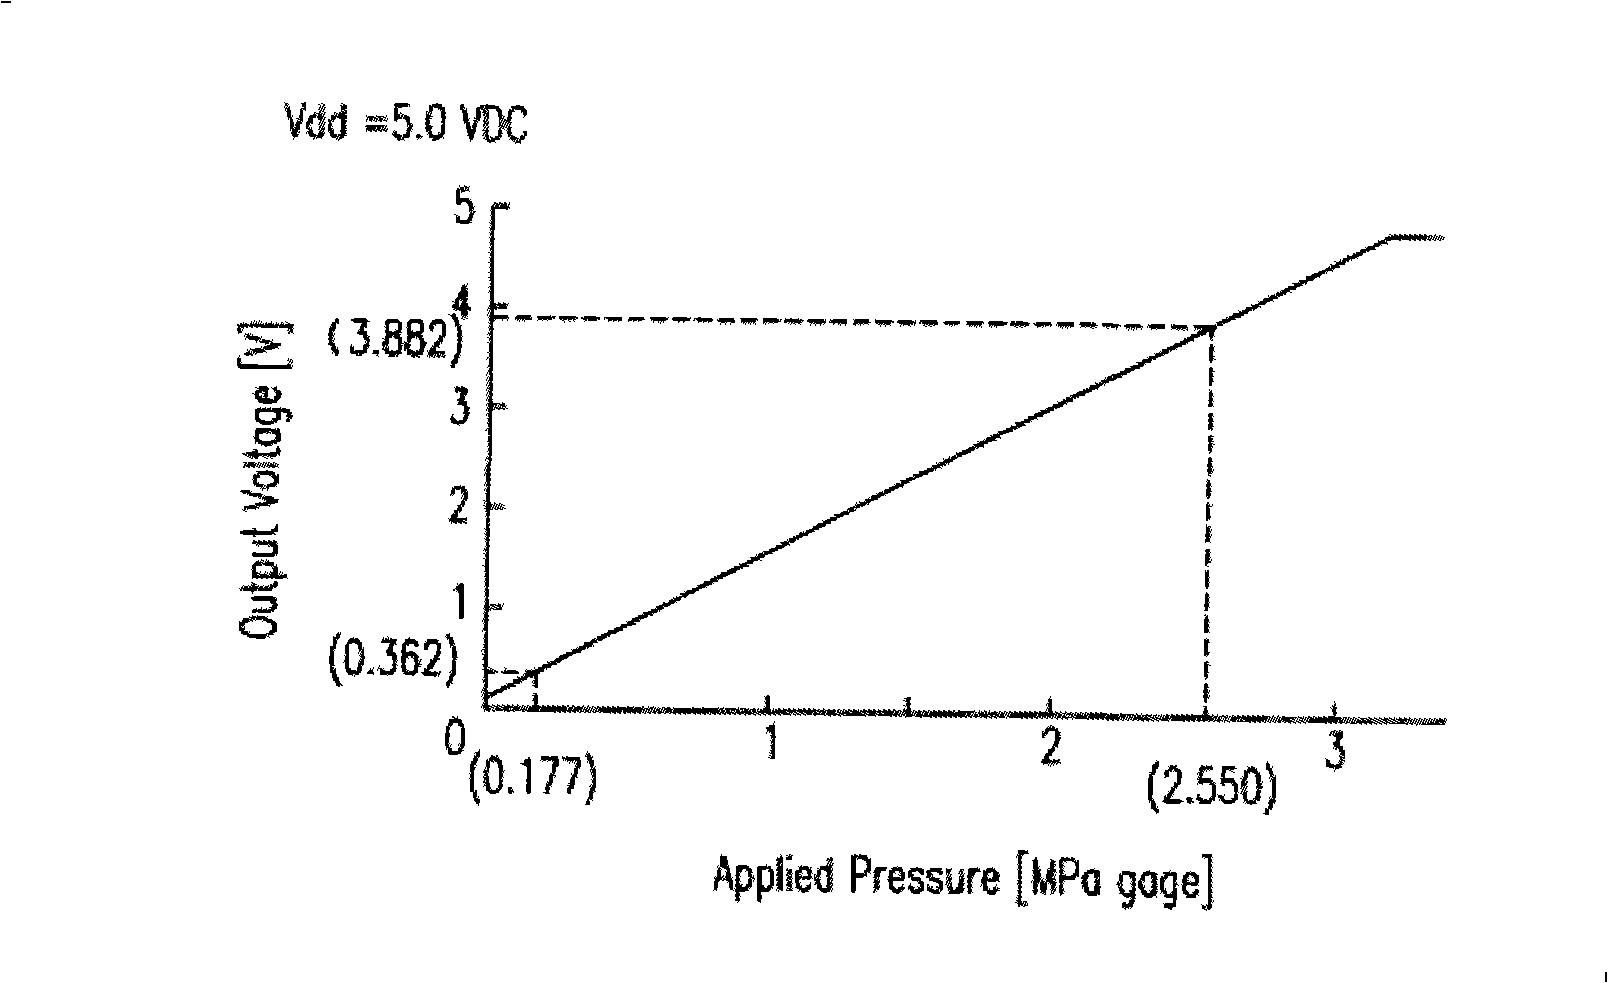 Power consumption control method for vehicle air conditioning